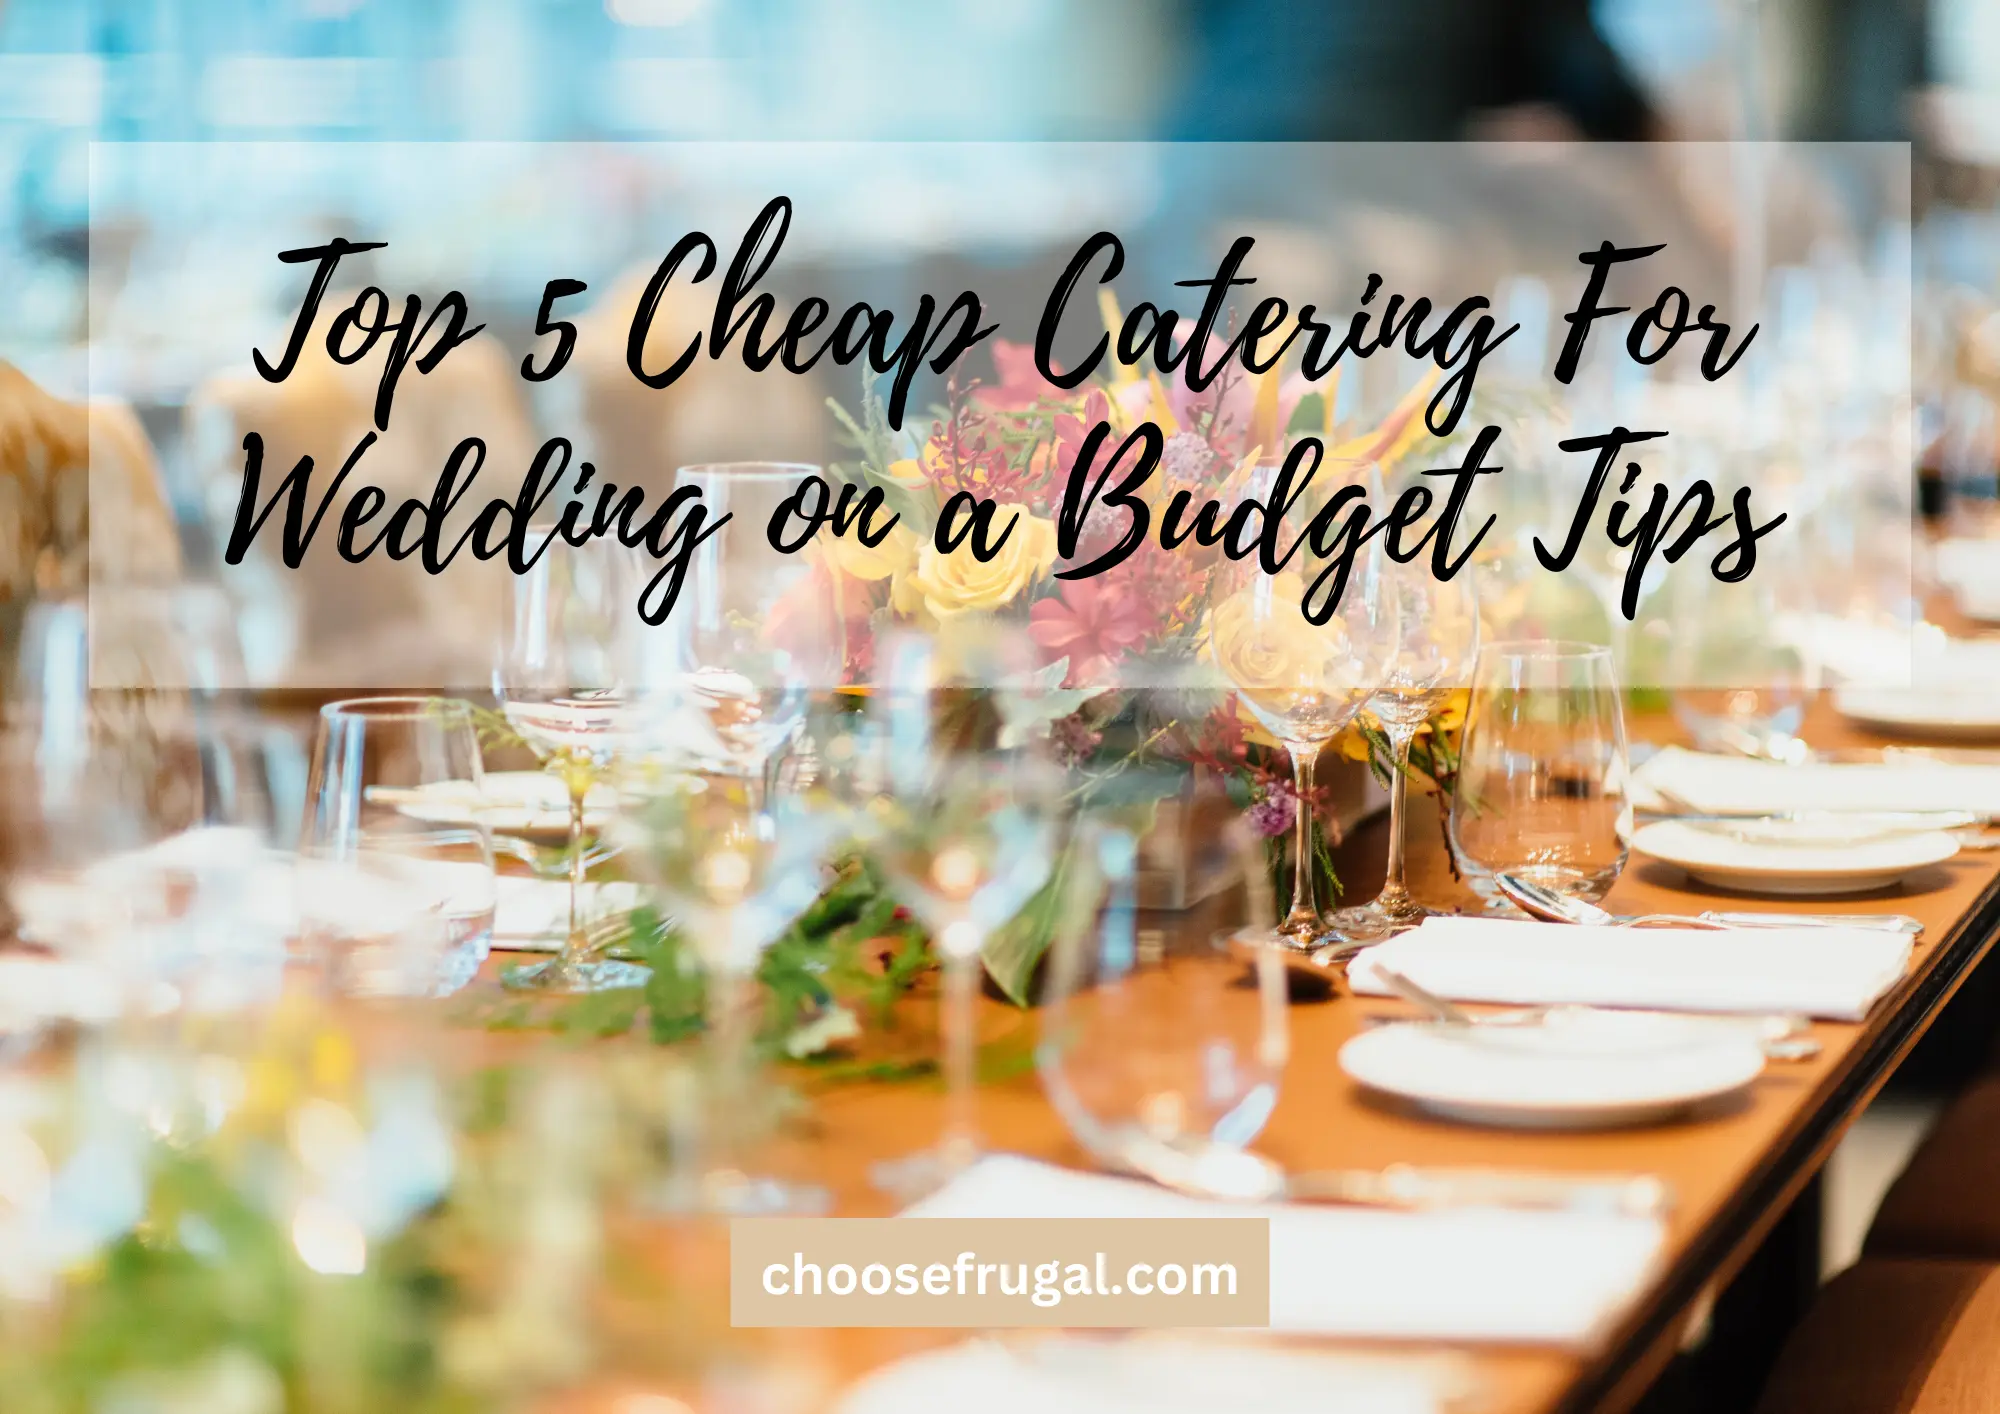 Top 5 Cheap Catering For Wedding on a Budget Tips. Table made up for a wedding.